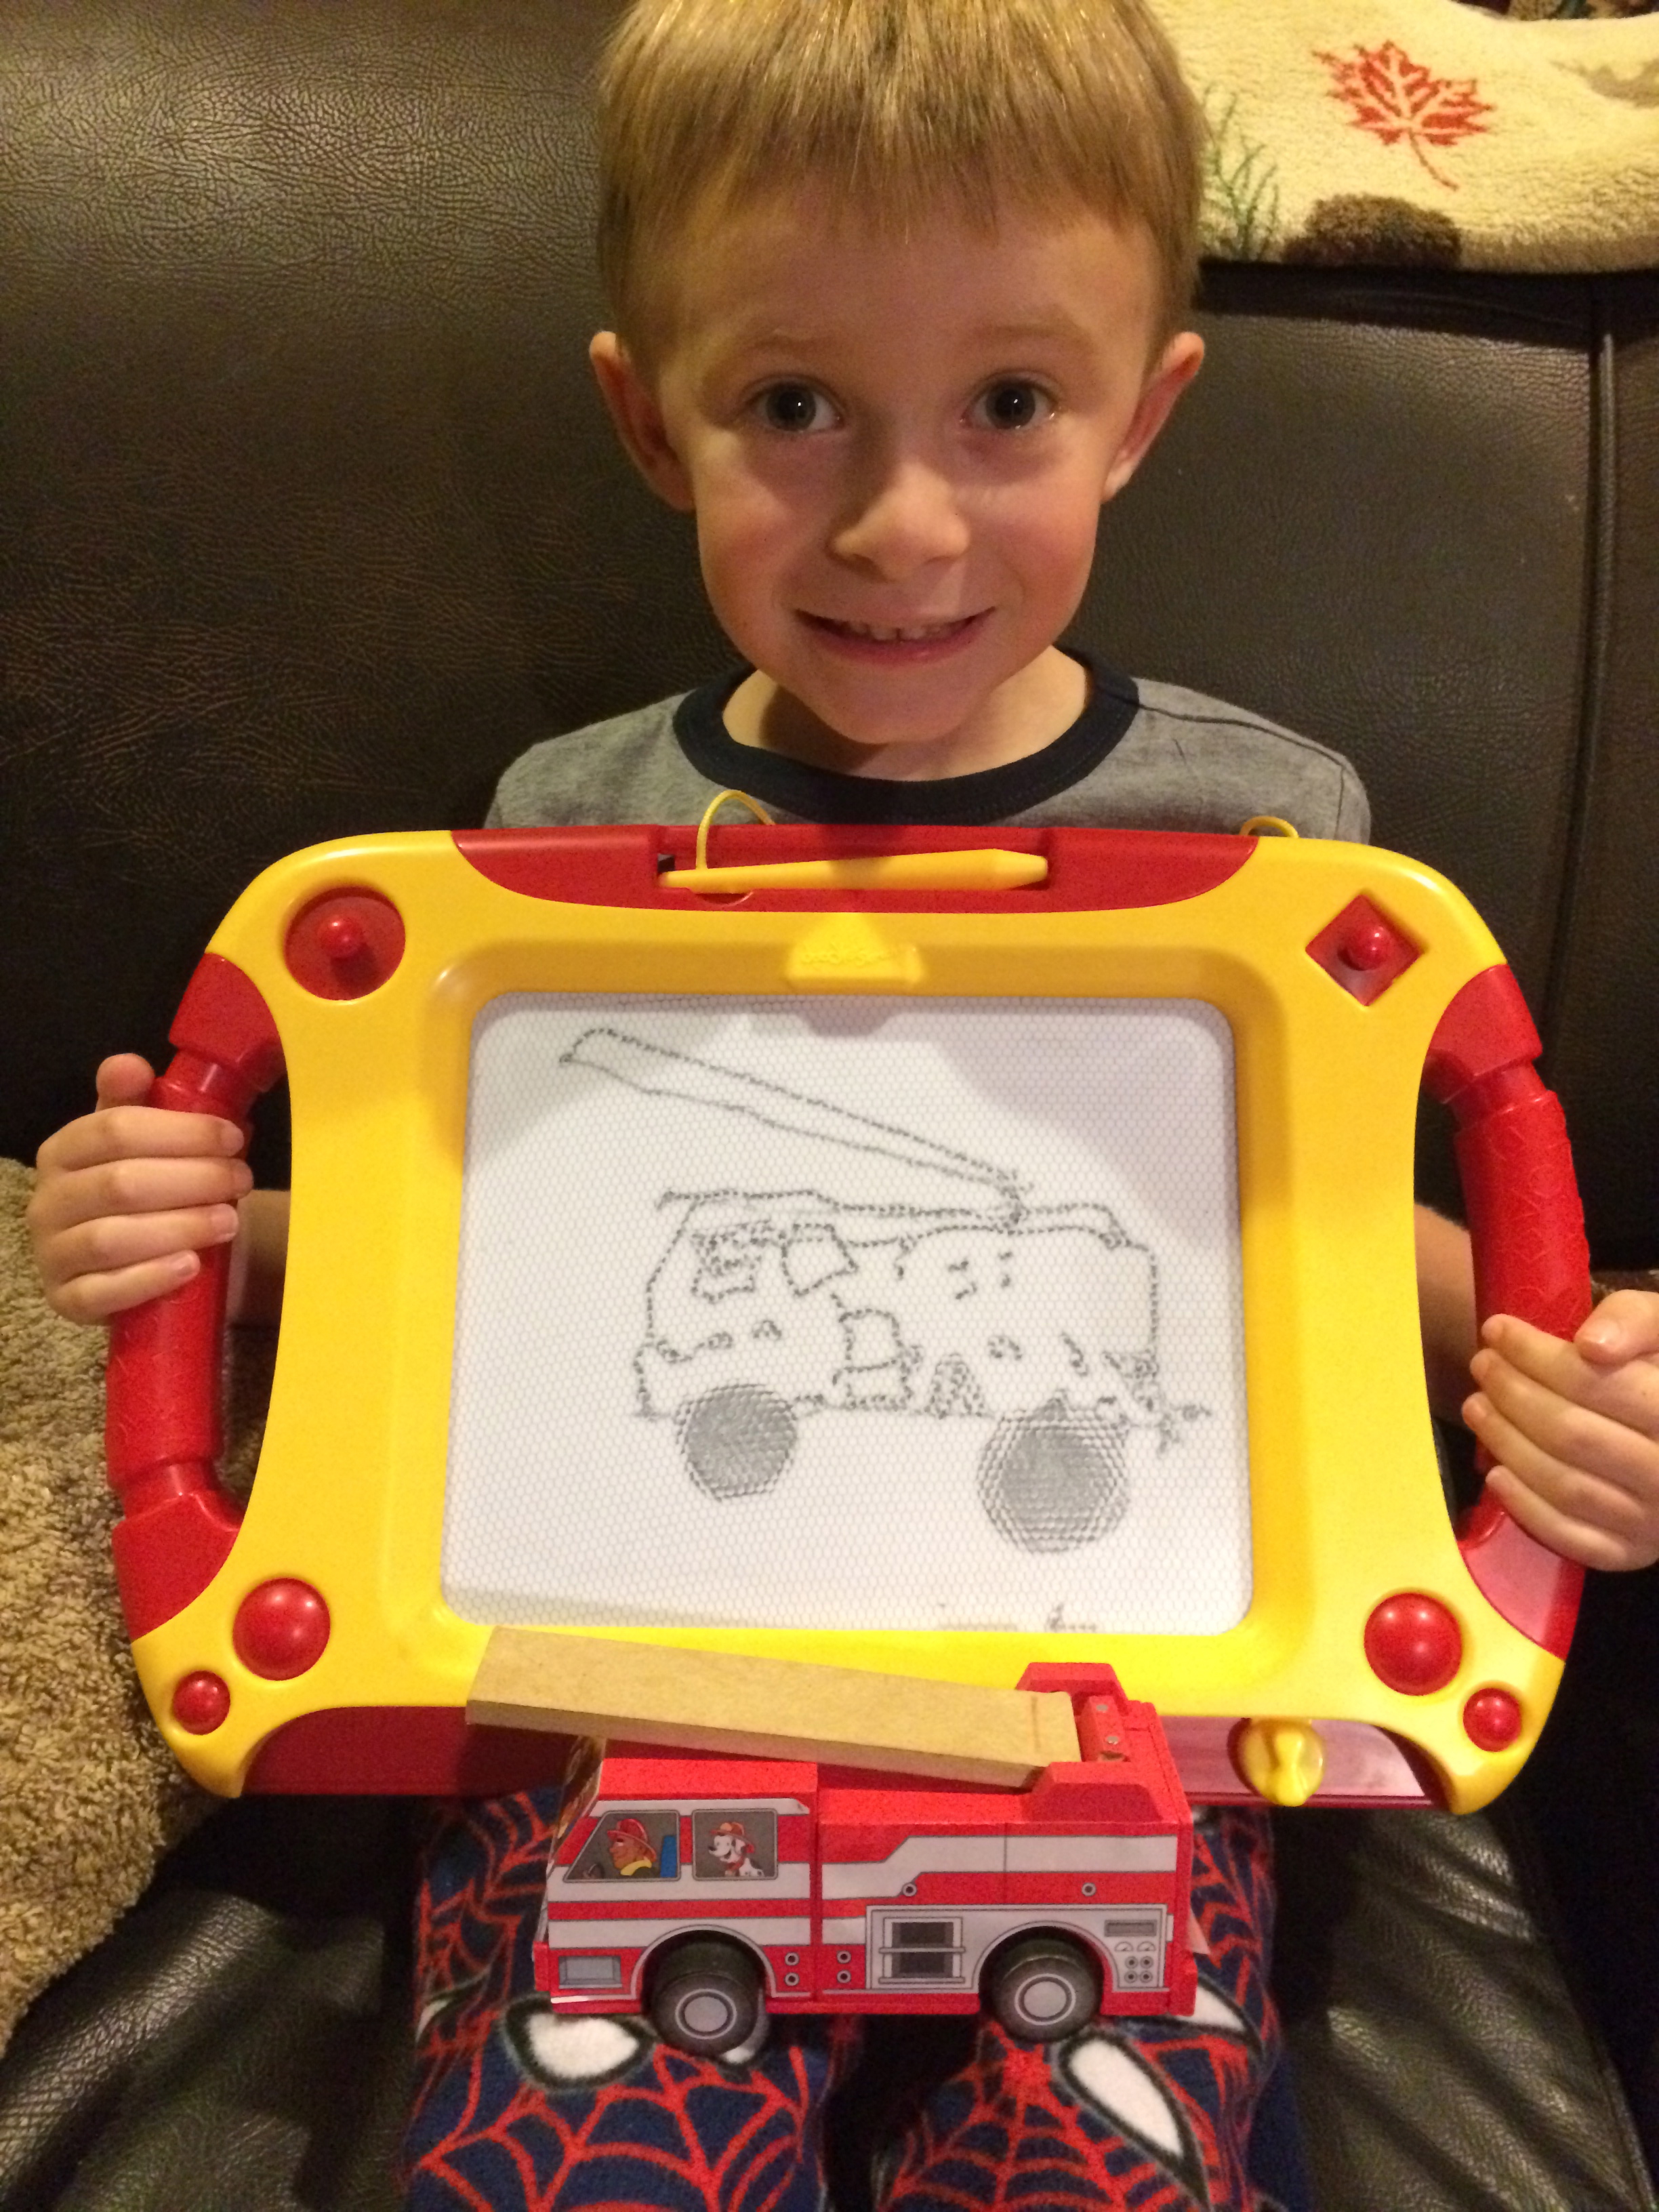 Tyler did a great job drawing his fire truck!